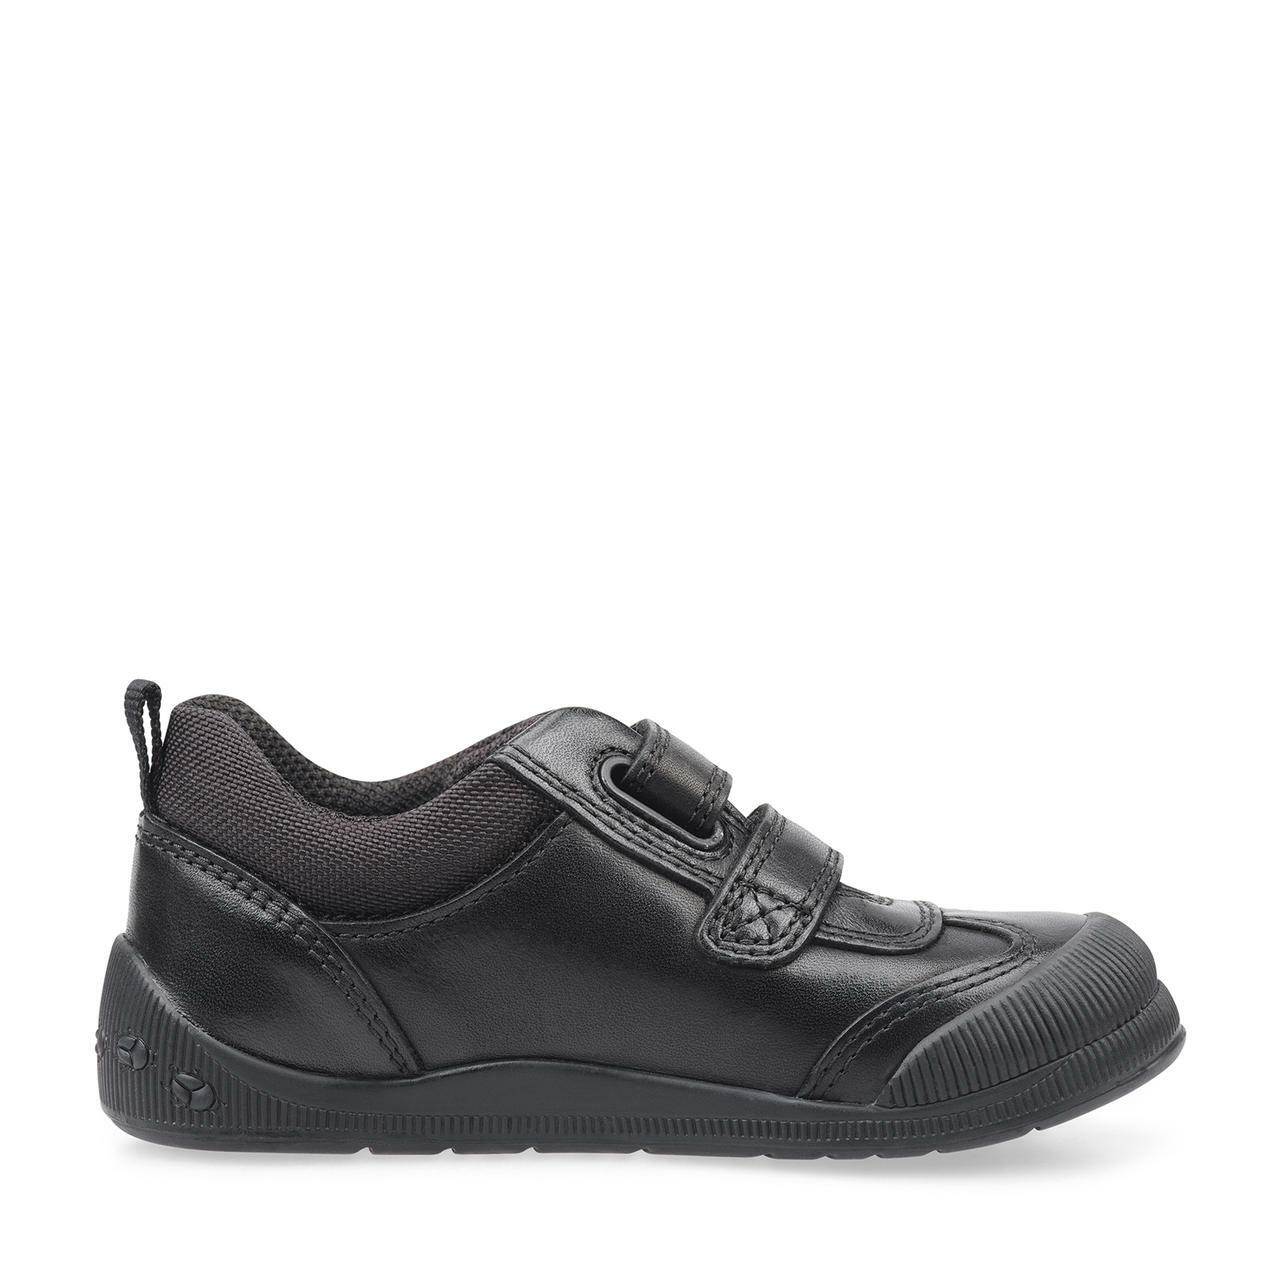 A boys pre school shoe by Start Rite,style Tickle, in black leather with double velcro fastening. Inner view.